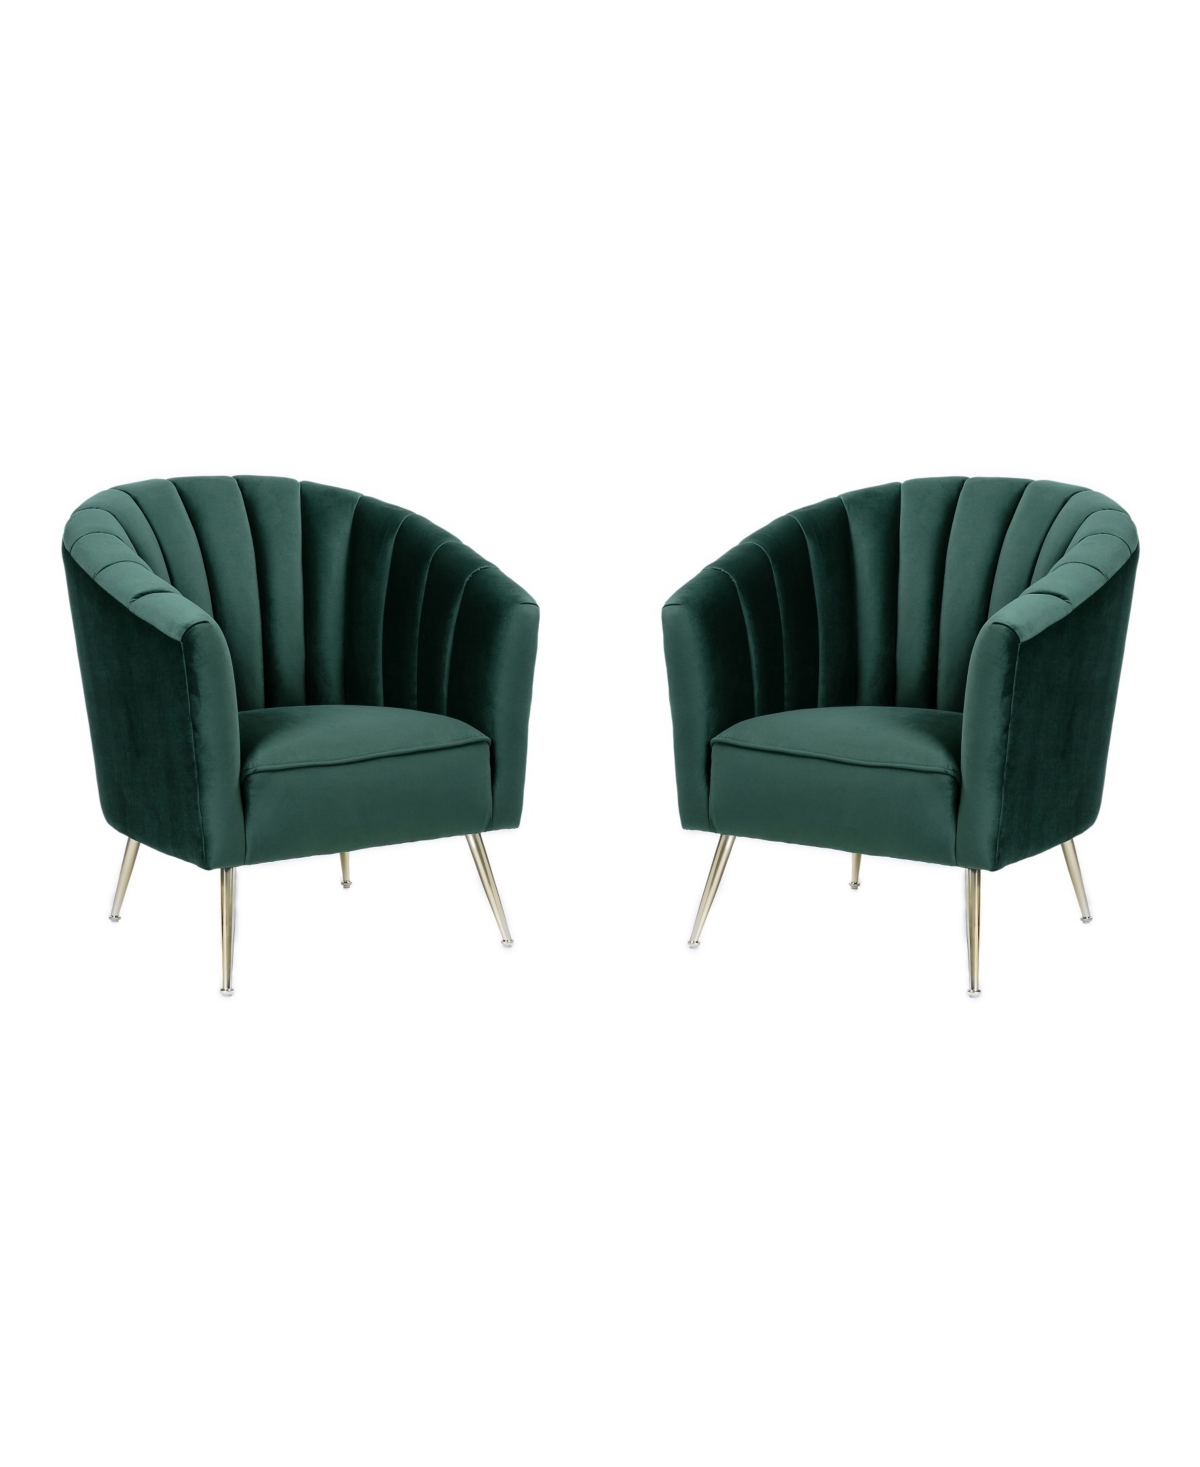 Manhattan Comfort Rosemont Accent Chair, Set Of 2 In Green,gold-tone